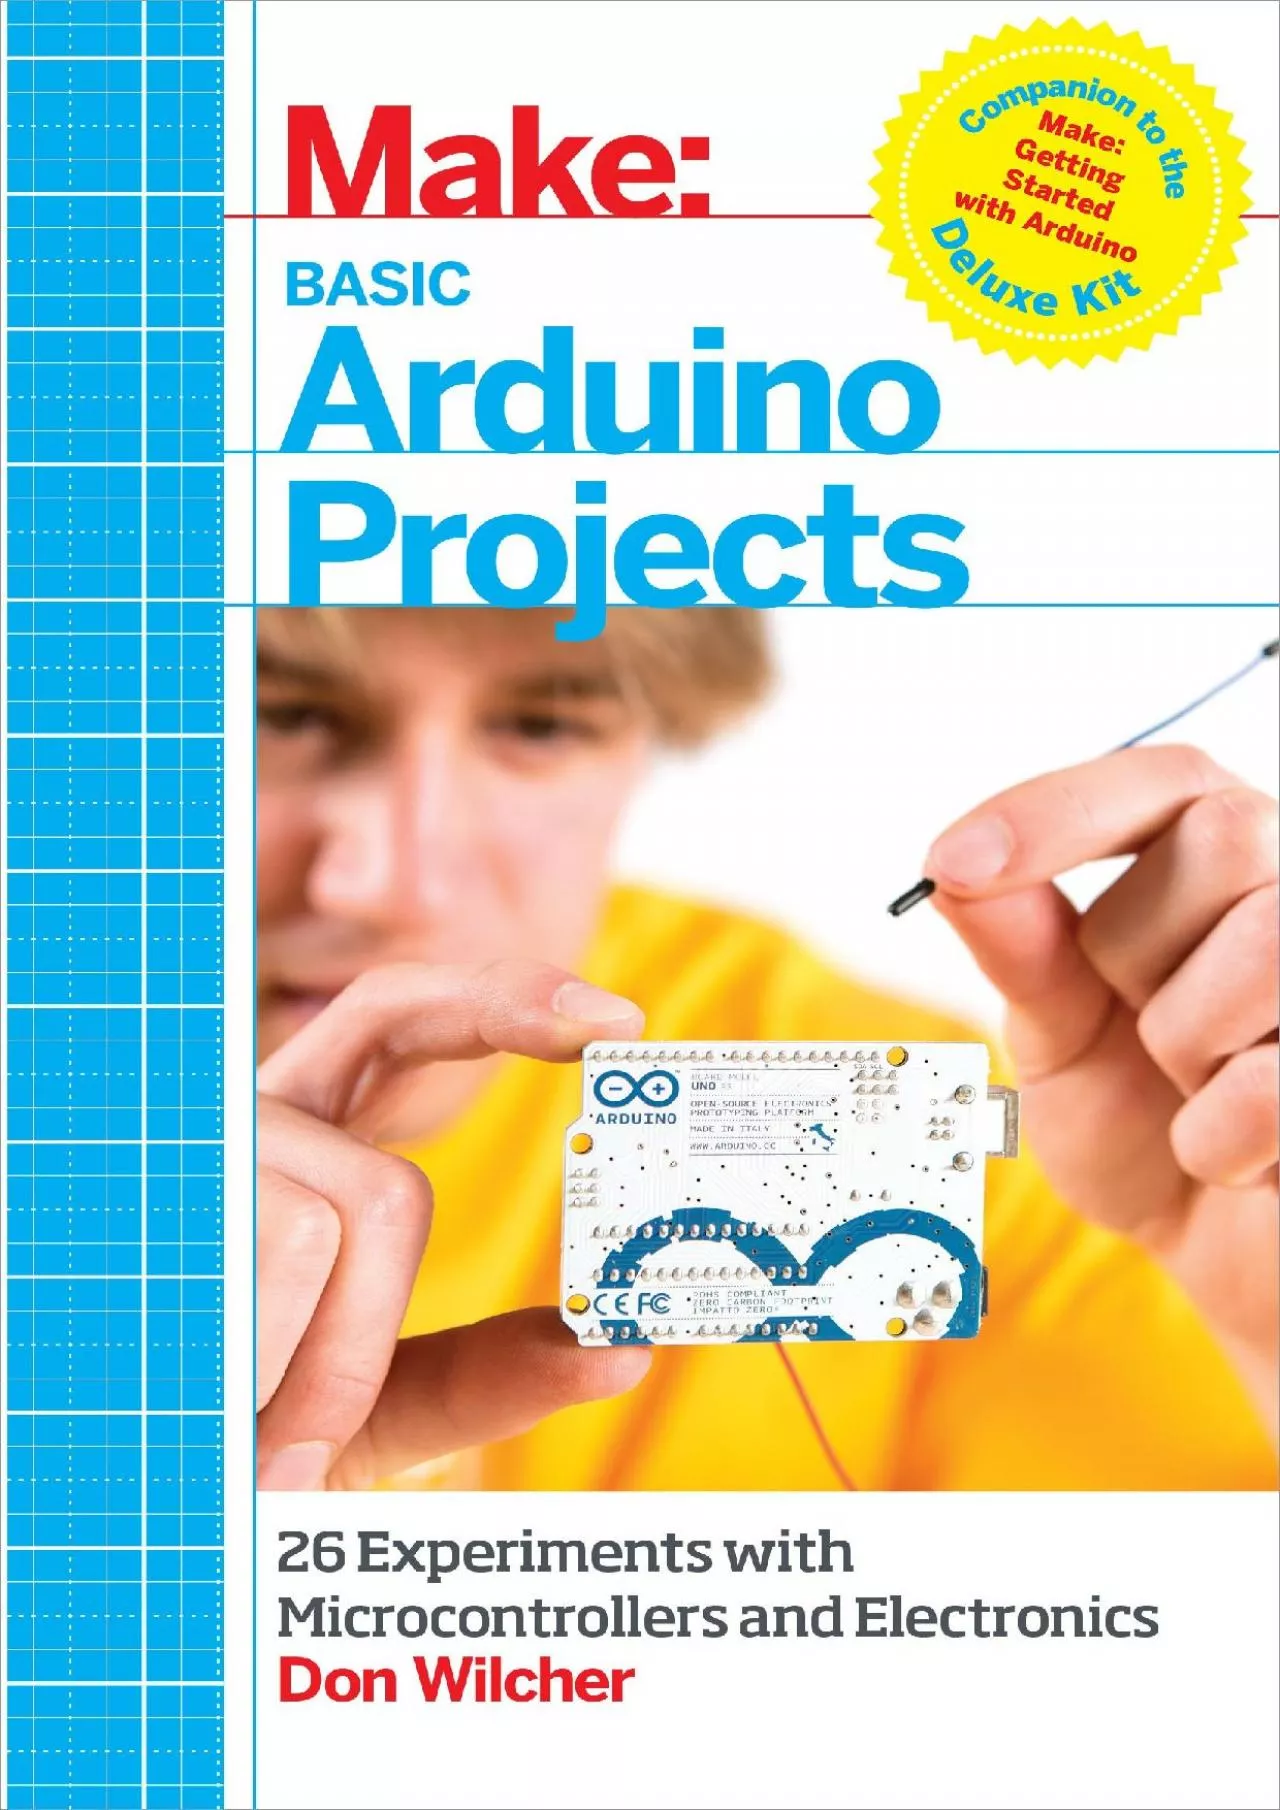 [BEST]-Basic Arduino Projects: 26 Experiments with Microcontrollers and Electronics (Make: